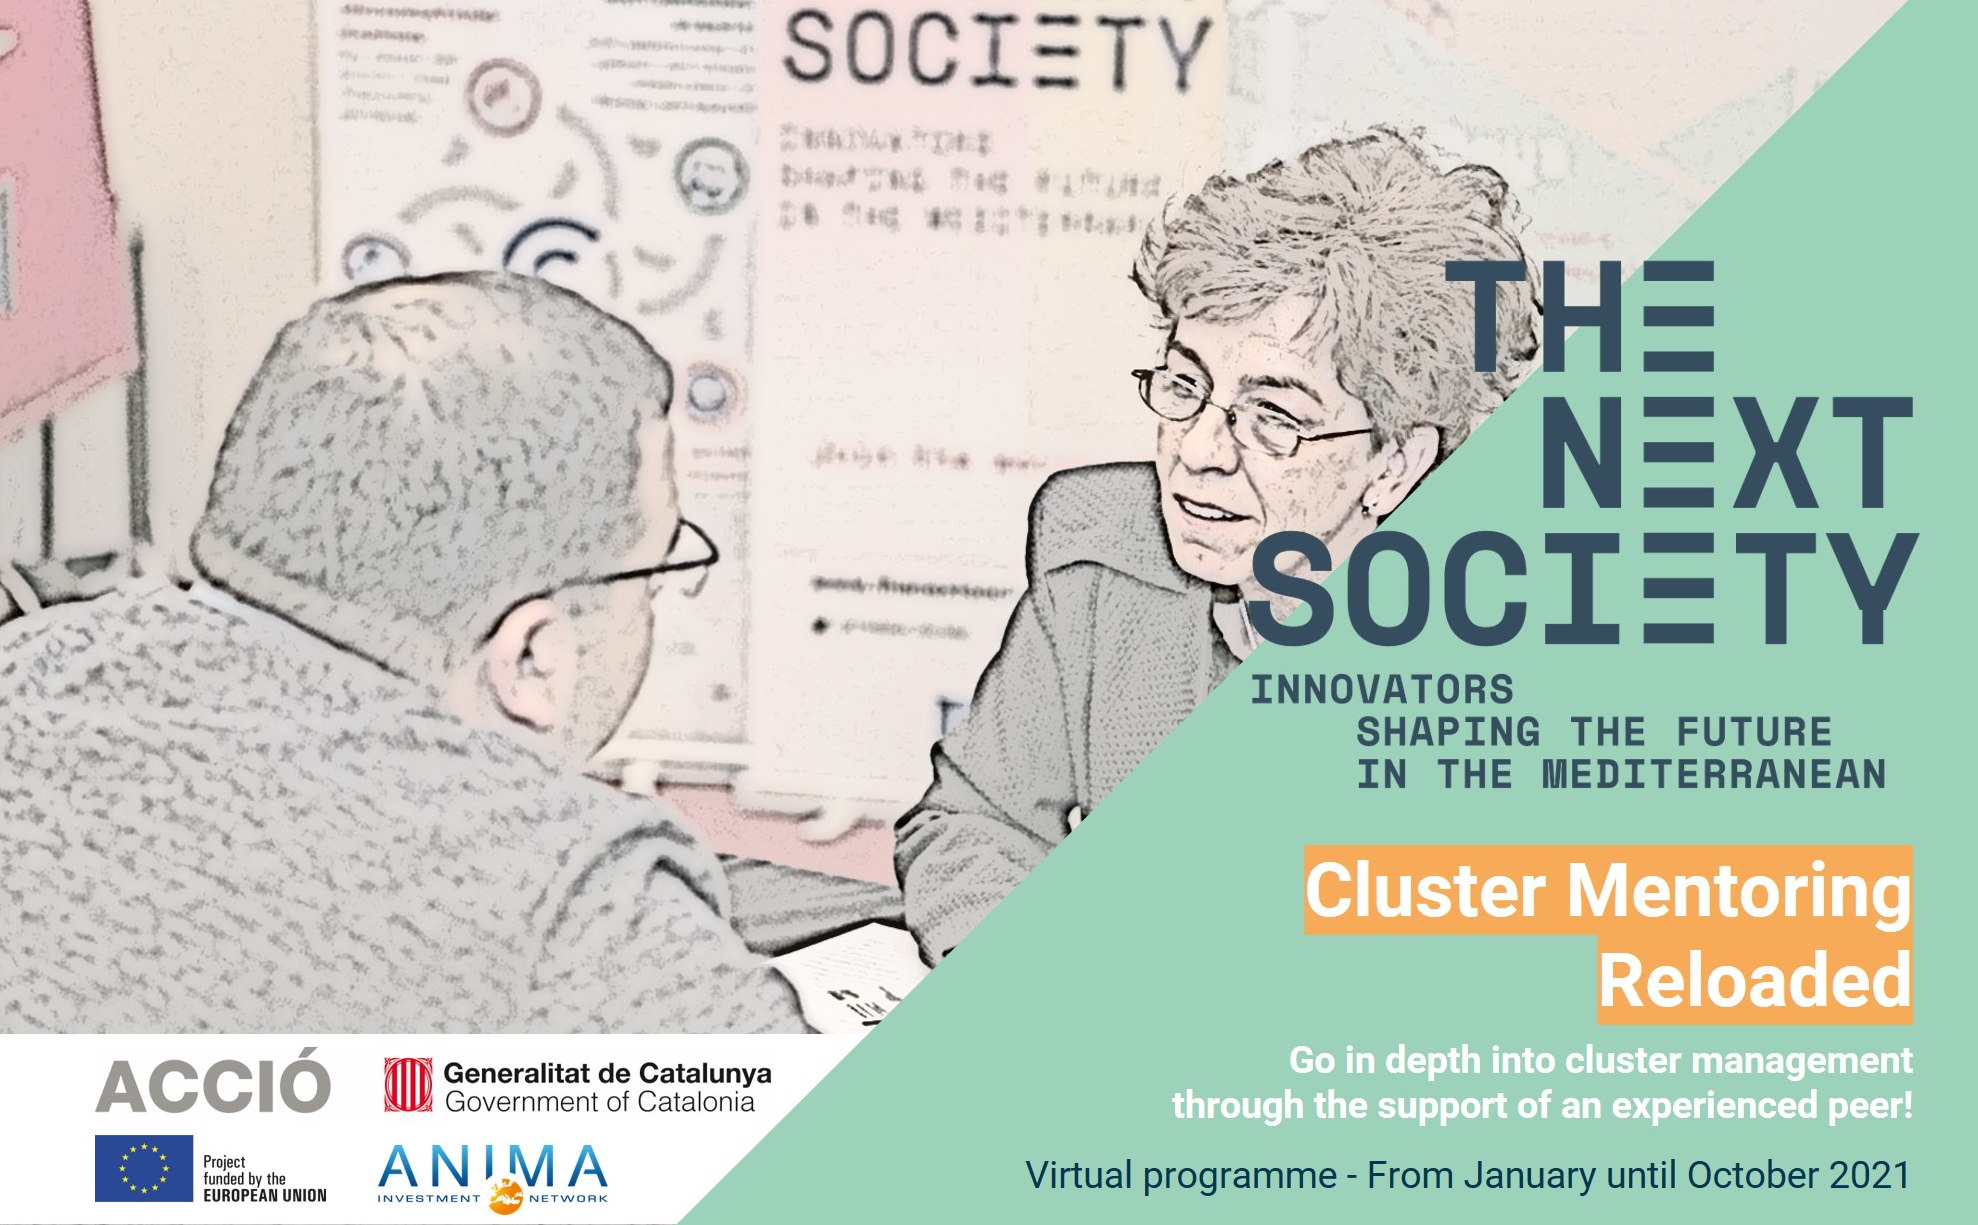 Cluster Mentoring Support Programme for MENA Cluster managers